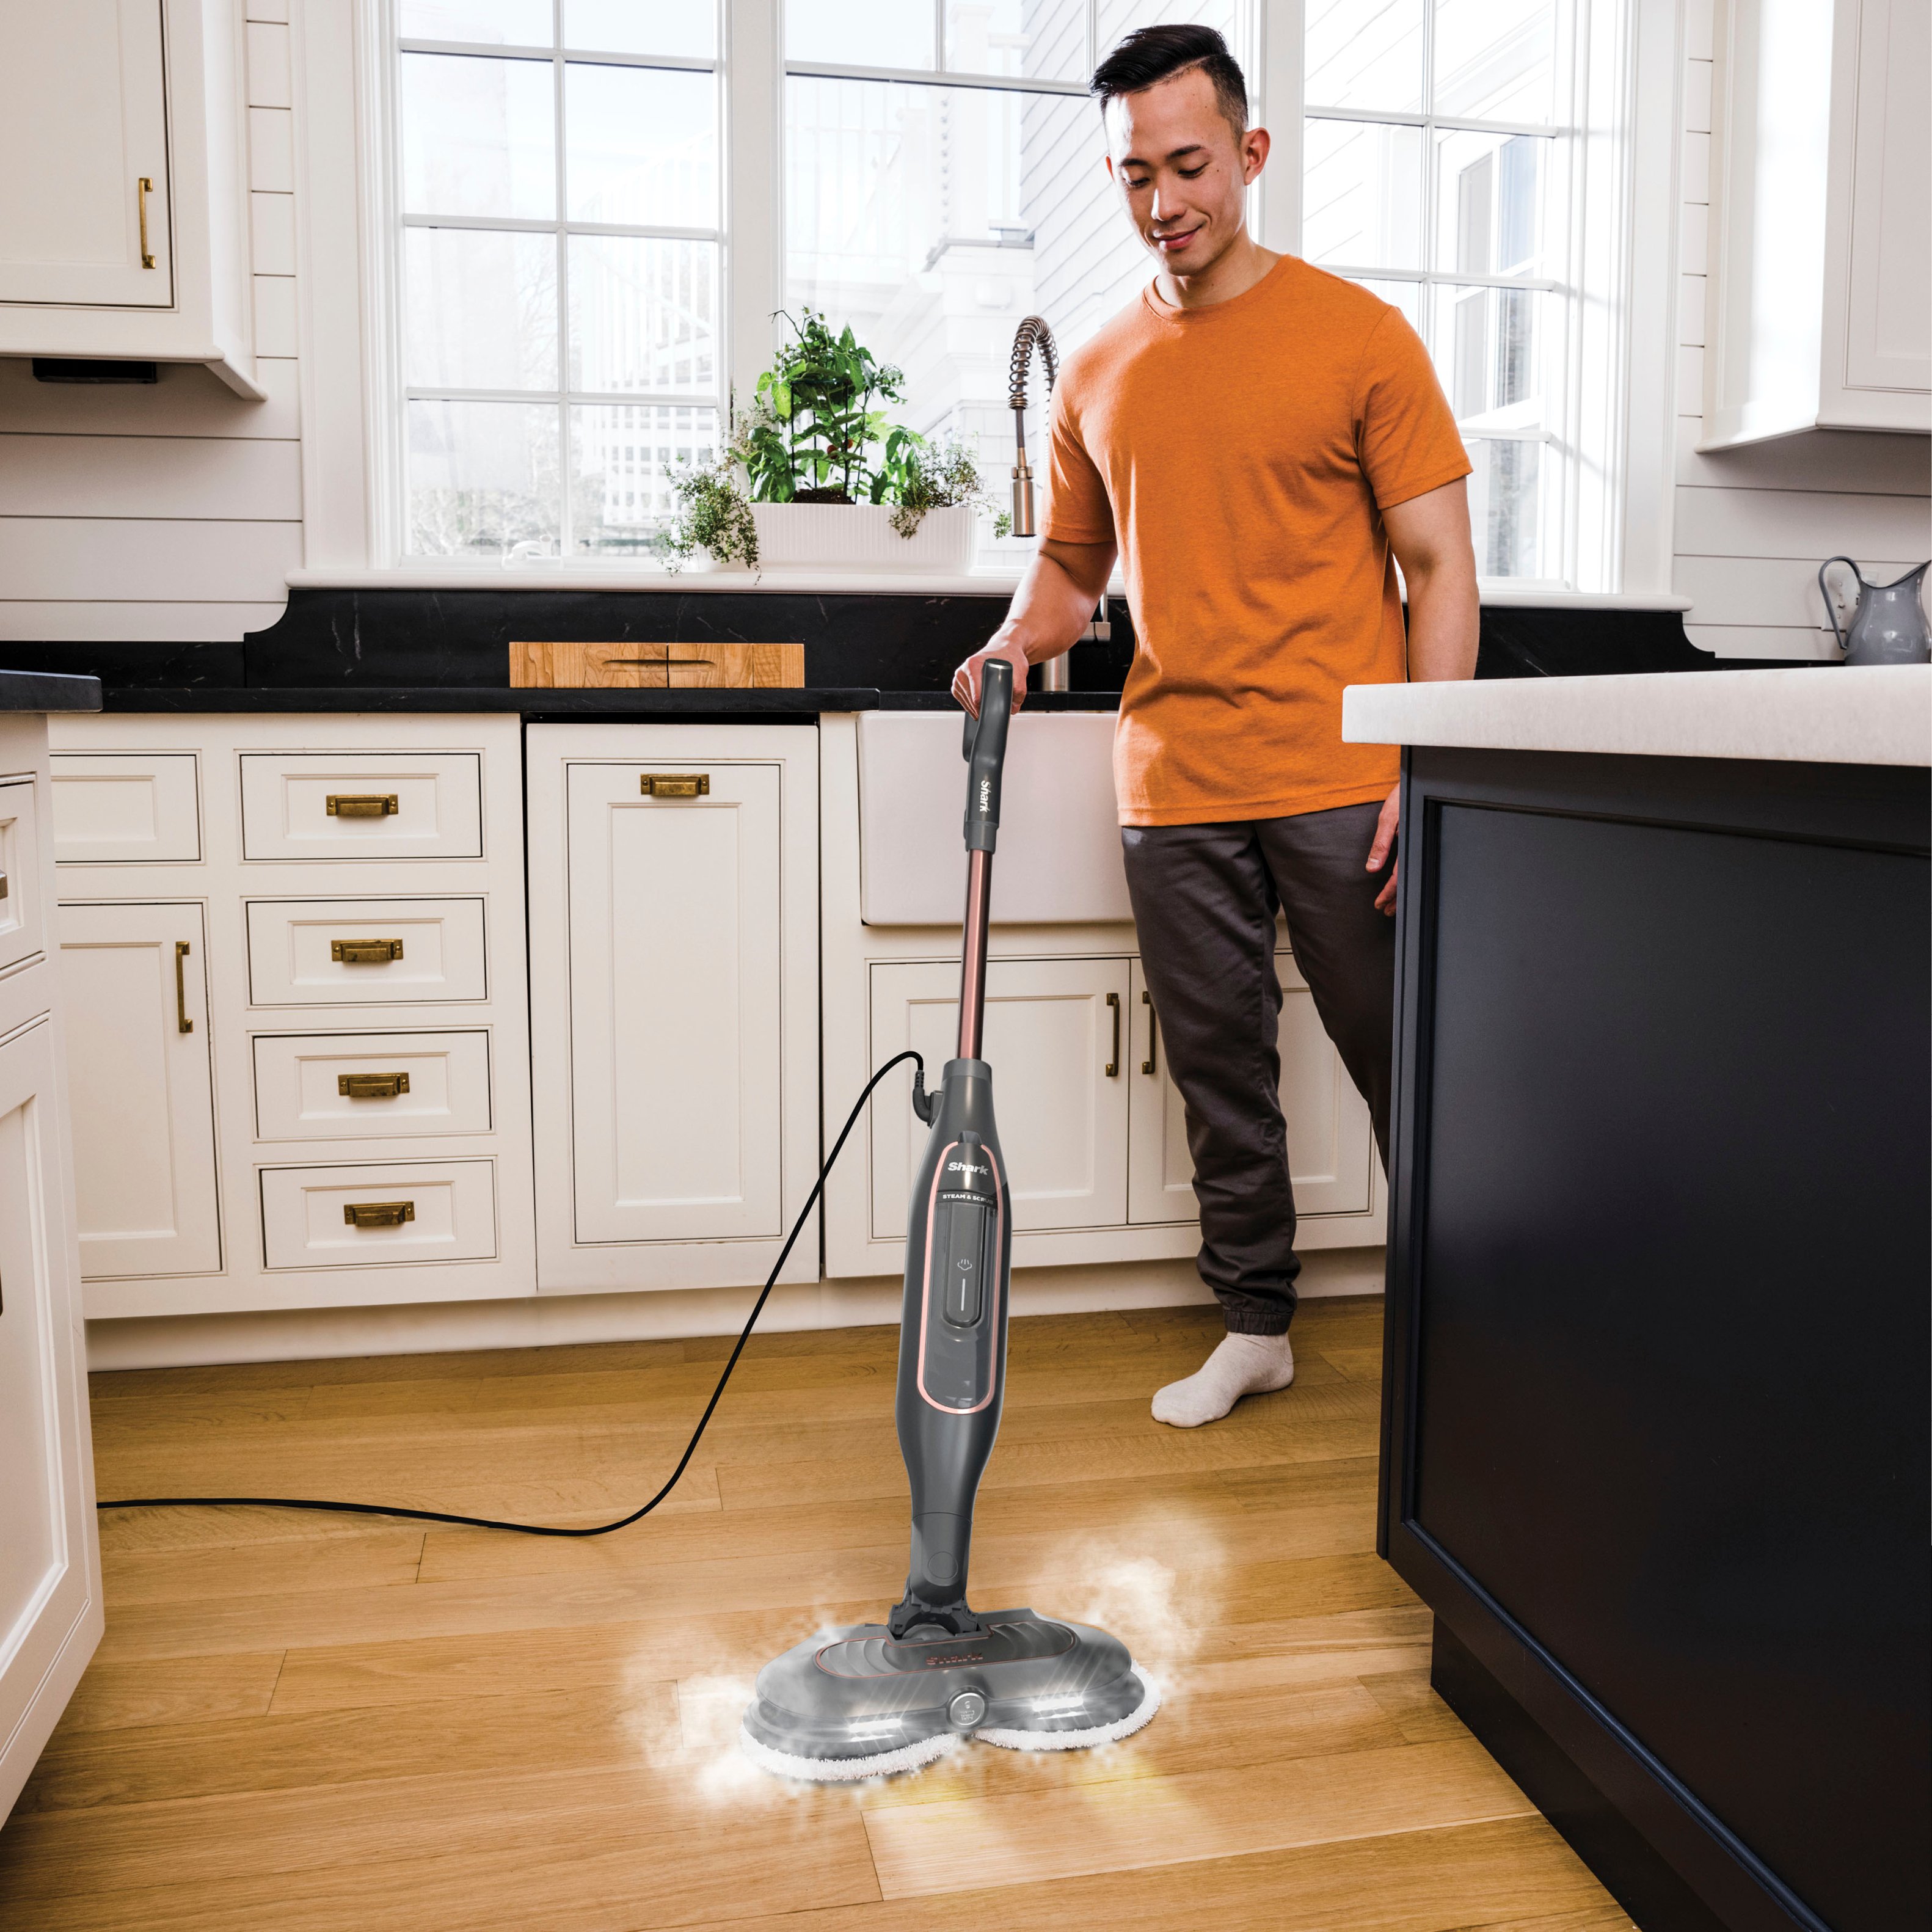 Shark/Ninja Shark Steam Mop Hard Floor Cleaner for Cleaning and Sanitizing  With XL Removable Water